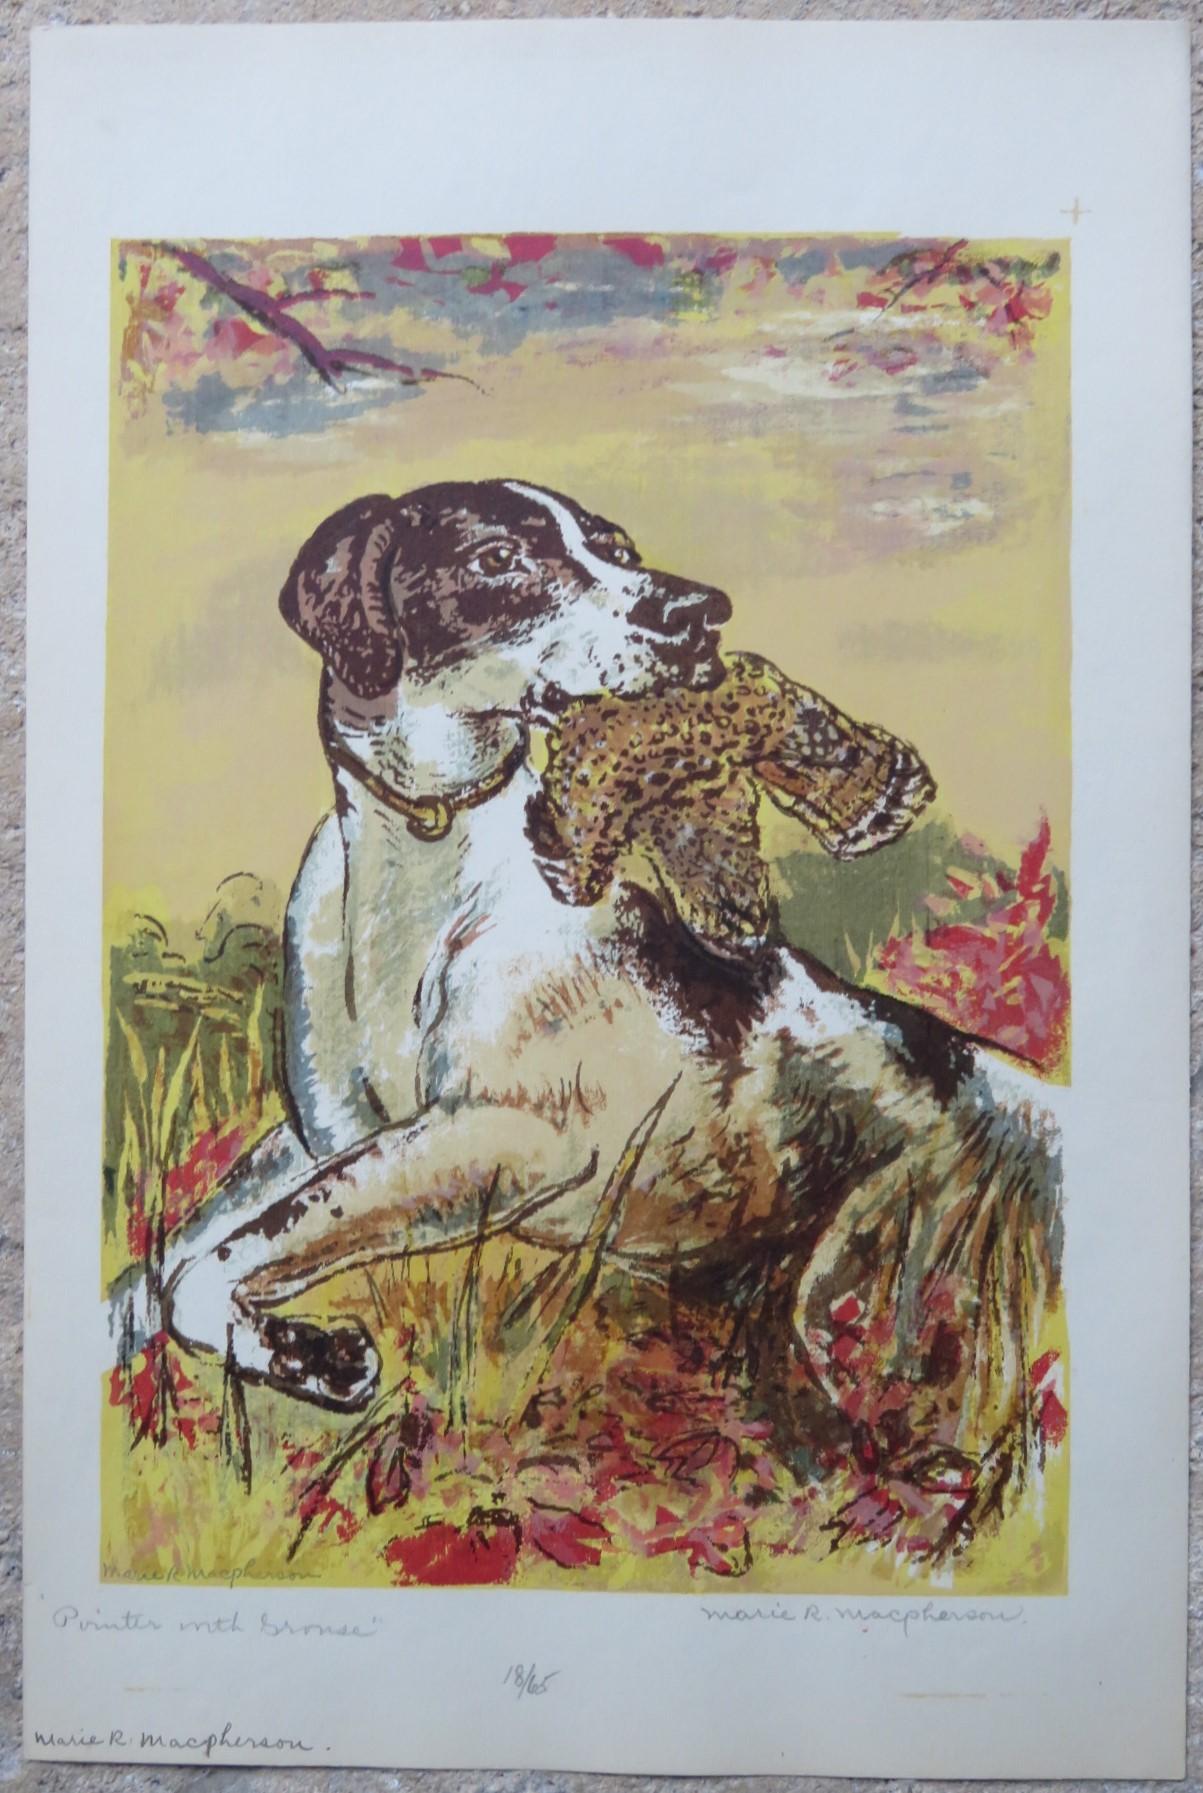 A trio of Marie MacPherson serigraphs dating back to the 1940s depicting birds and sporting dogs.  According to a written statement by her, 